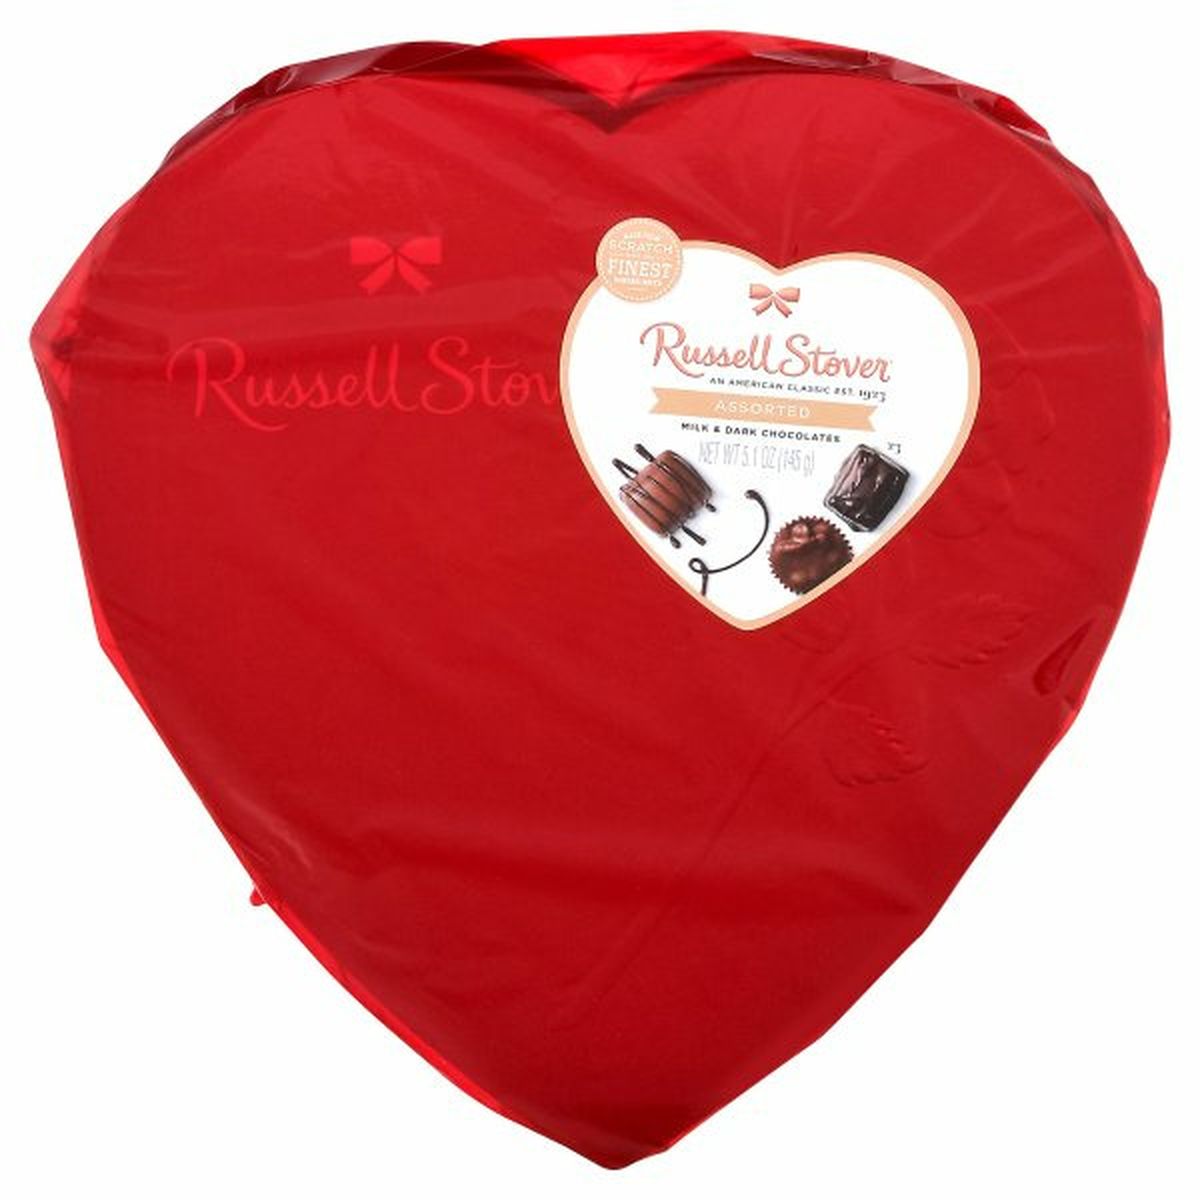 Calories in Russell Stover Milk & Dark Chocolates, Assorted